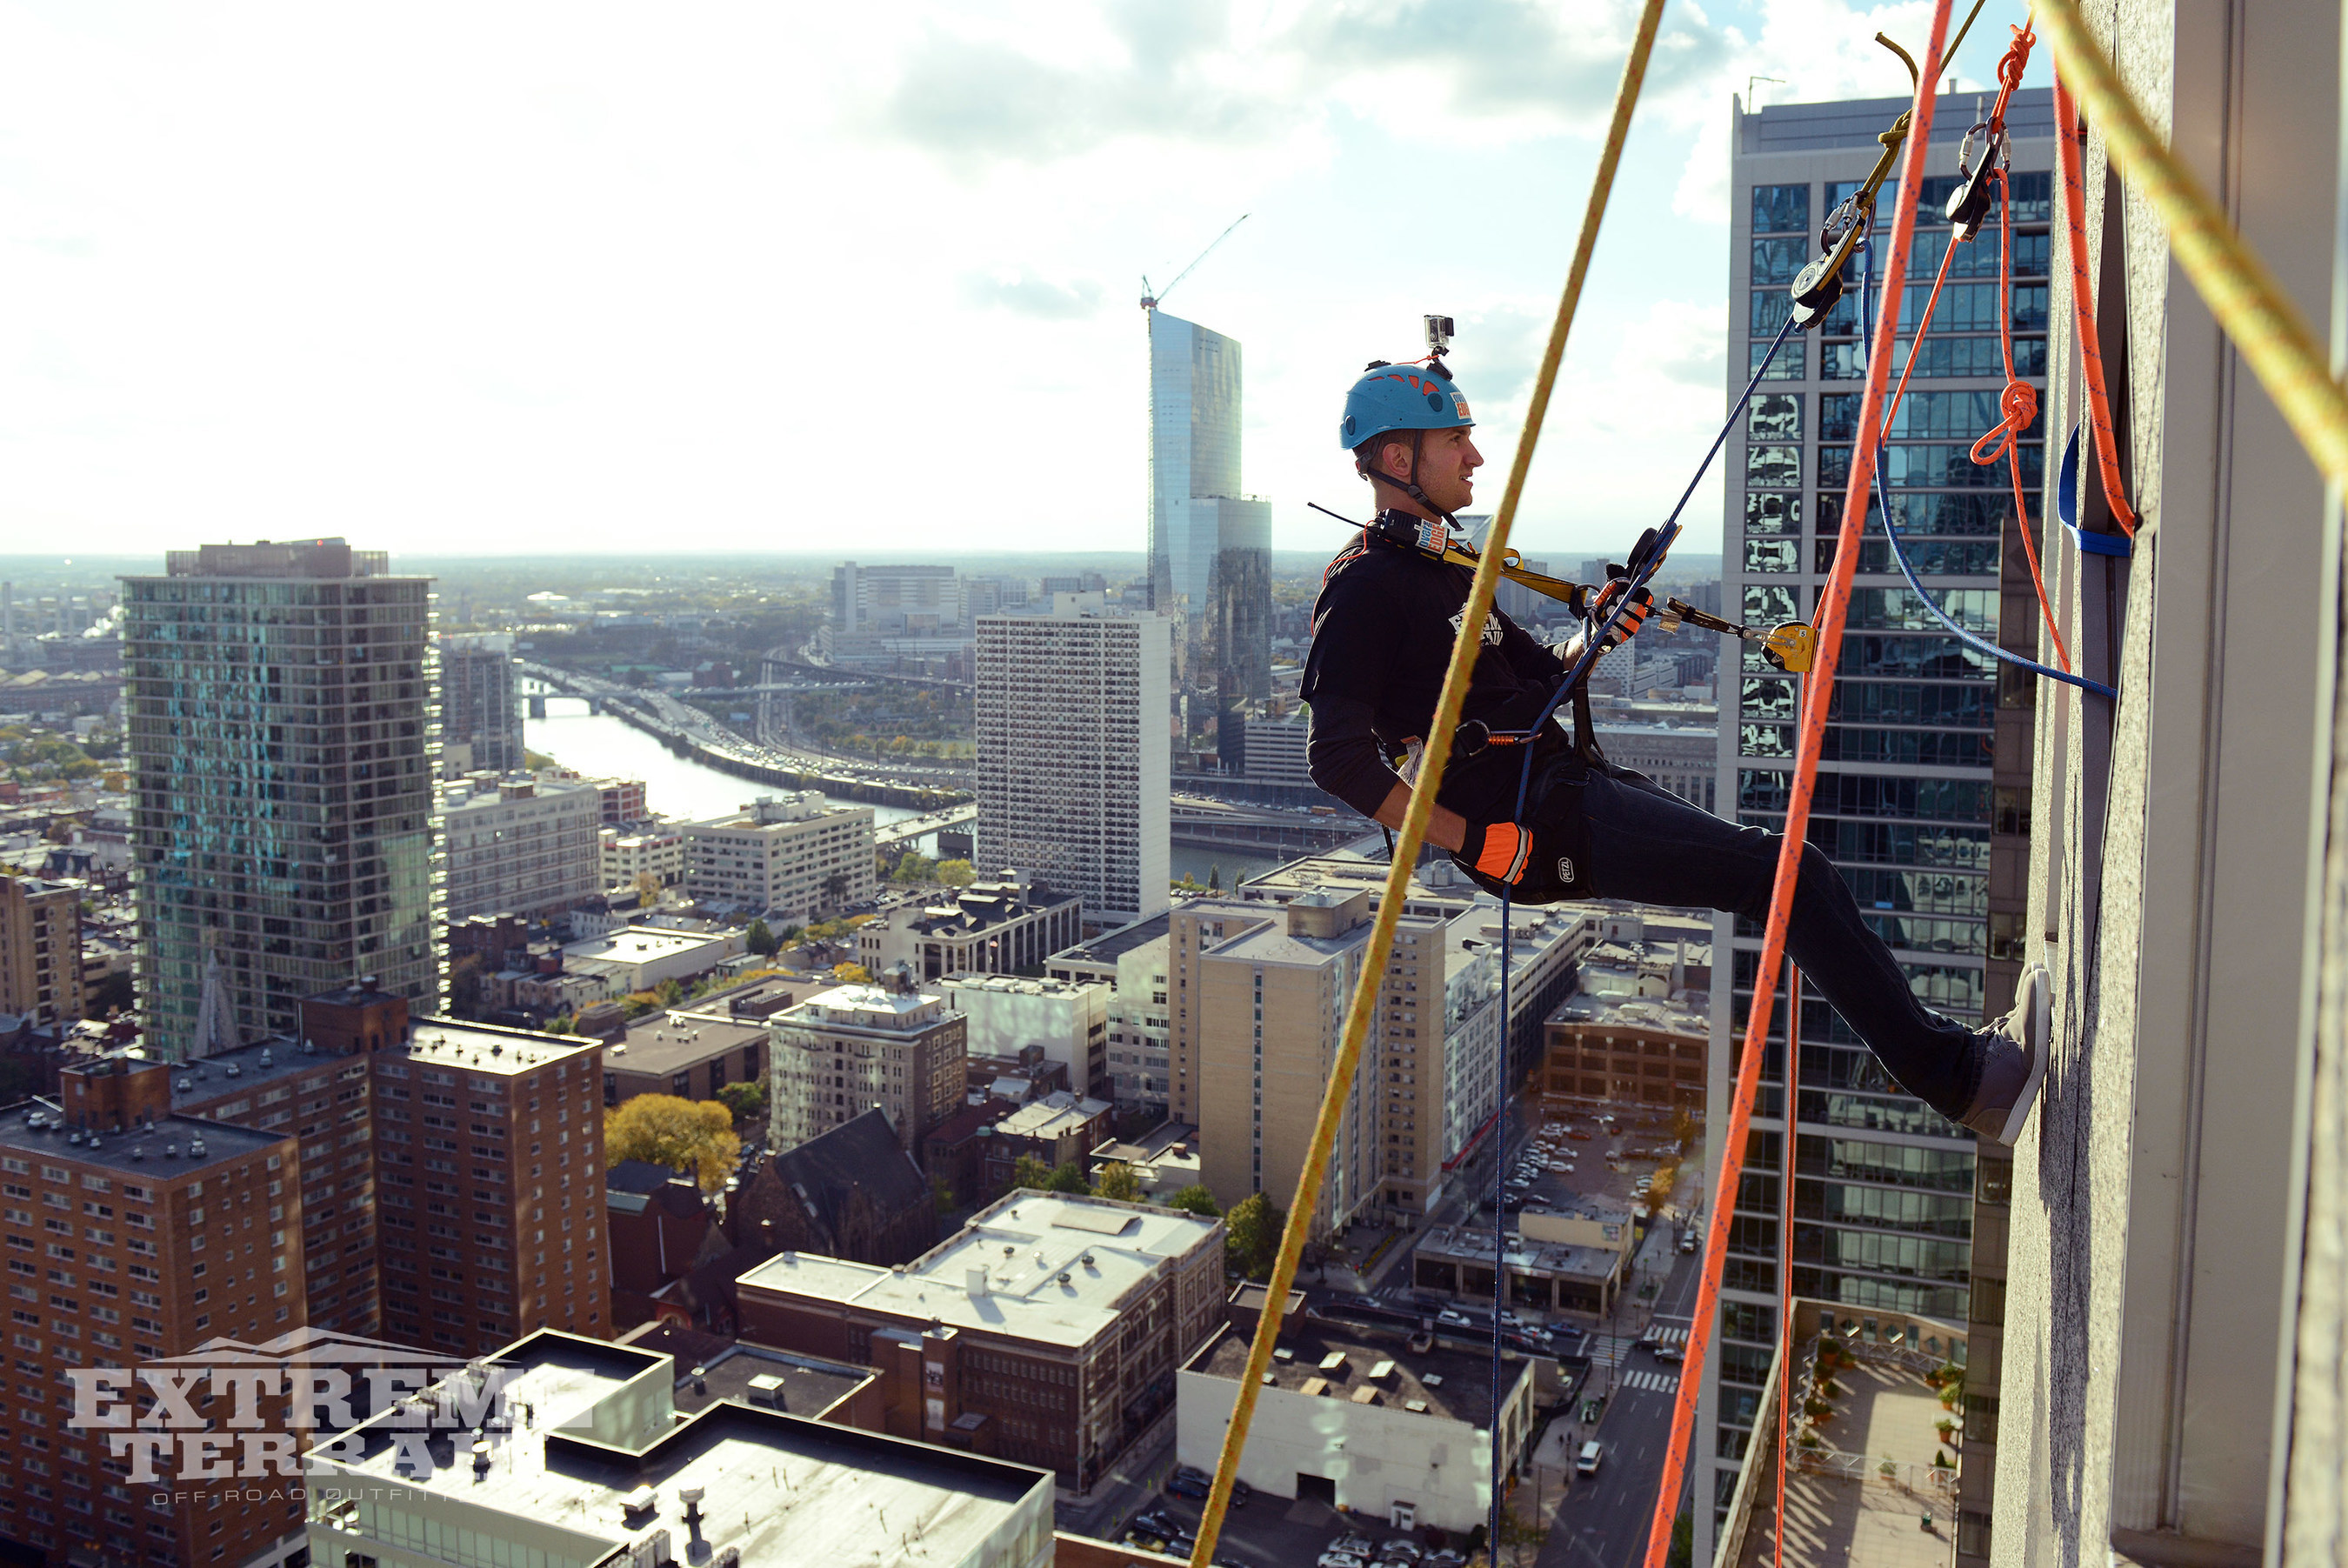 ExtremeTerrain Co-founder Andrew Voudouris shows fellow adventurers how it's done as he gets ready to rappel over 500 feet to the Philly streets.